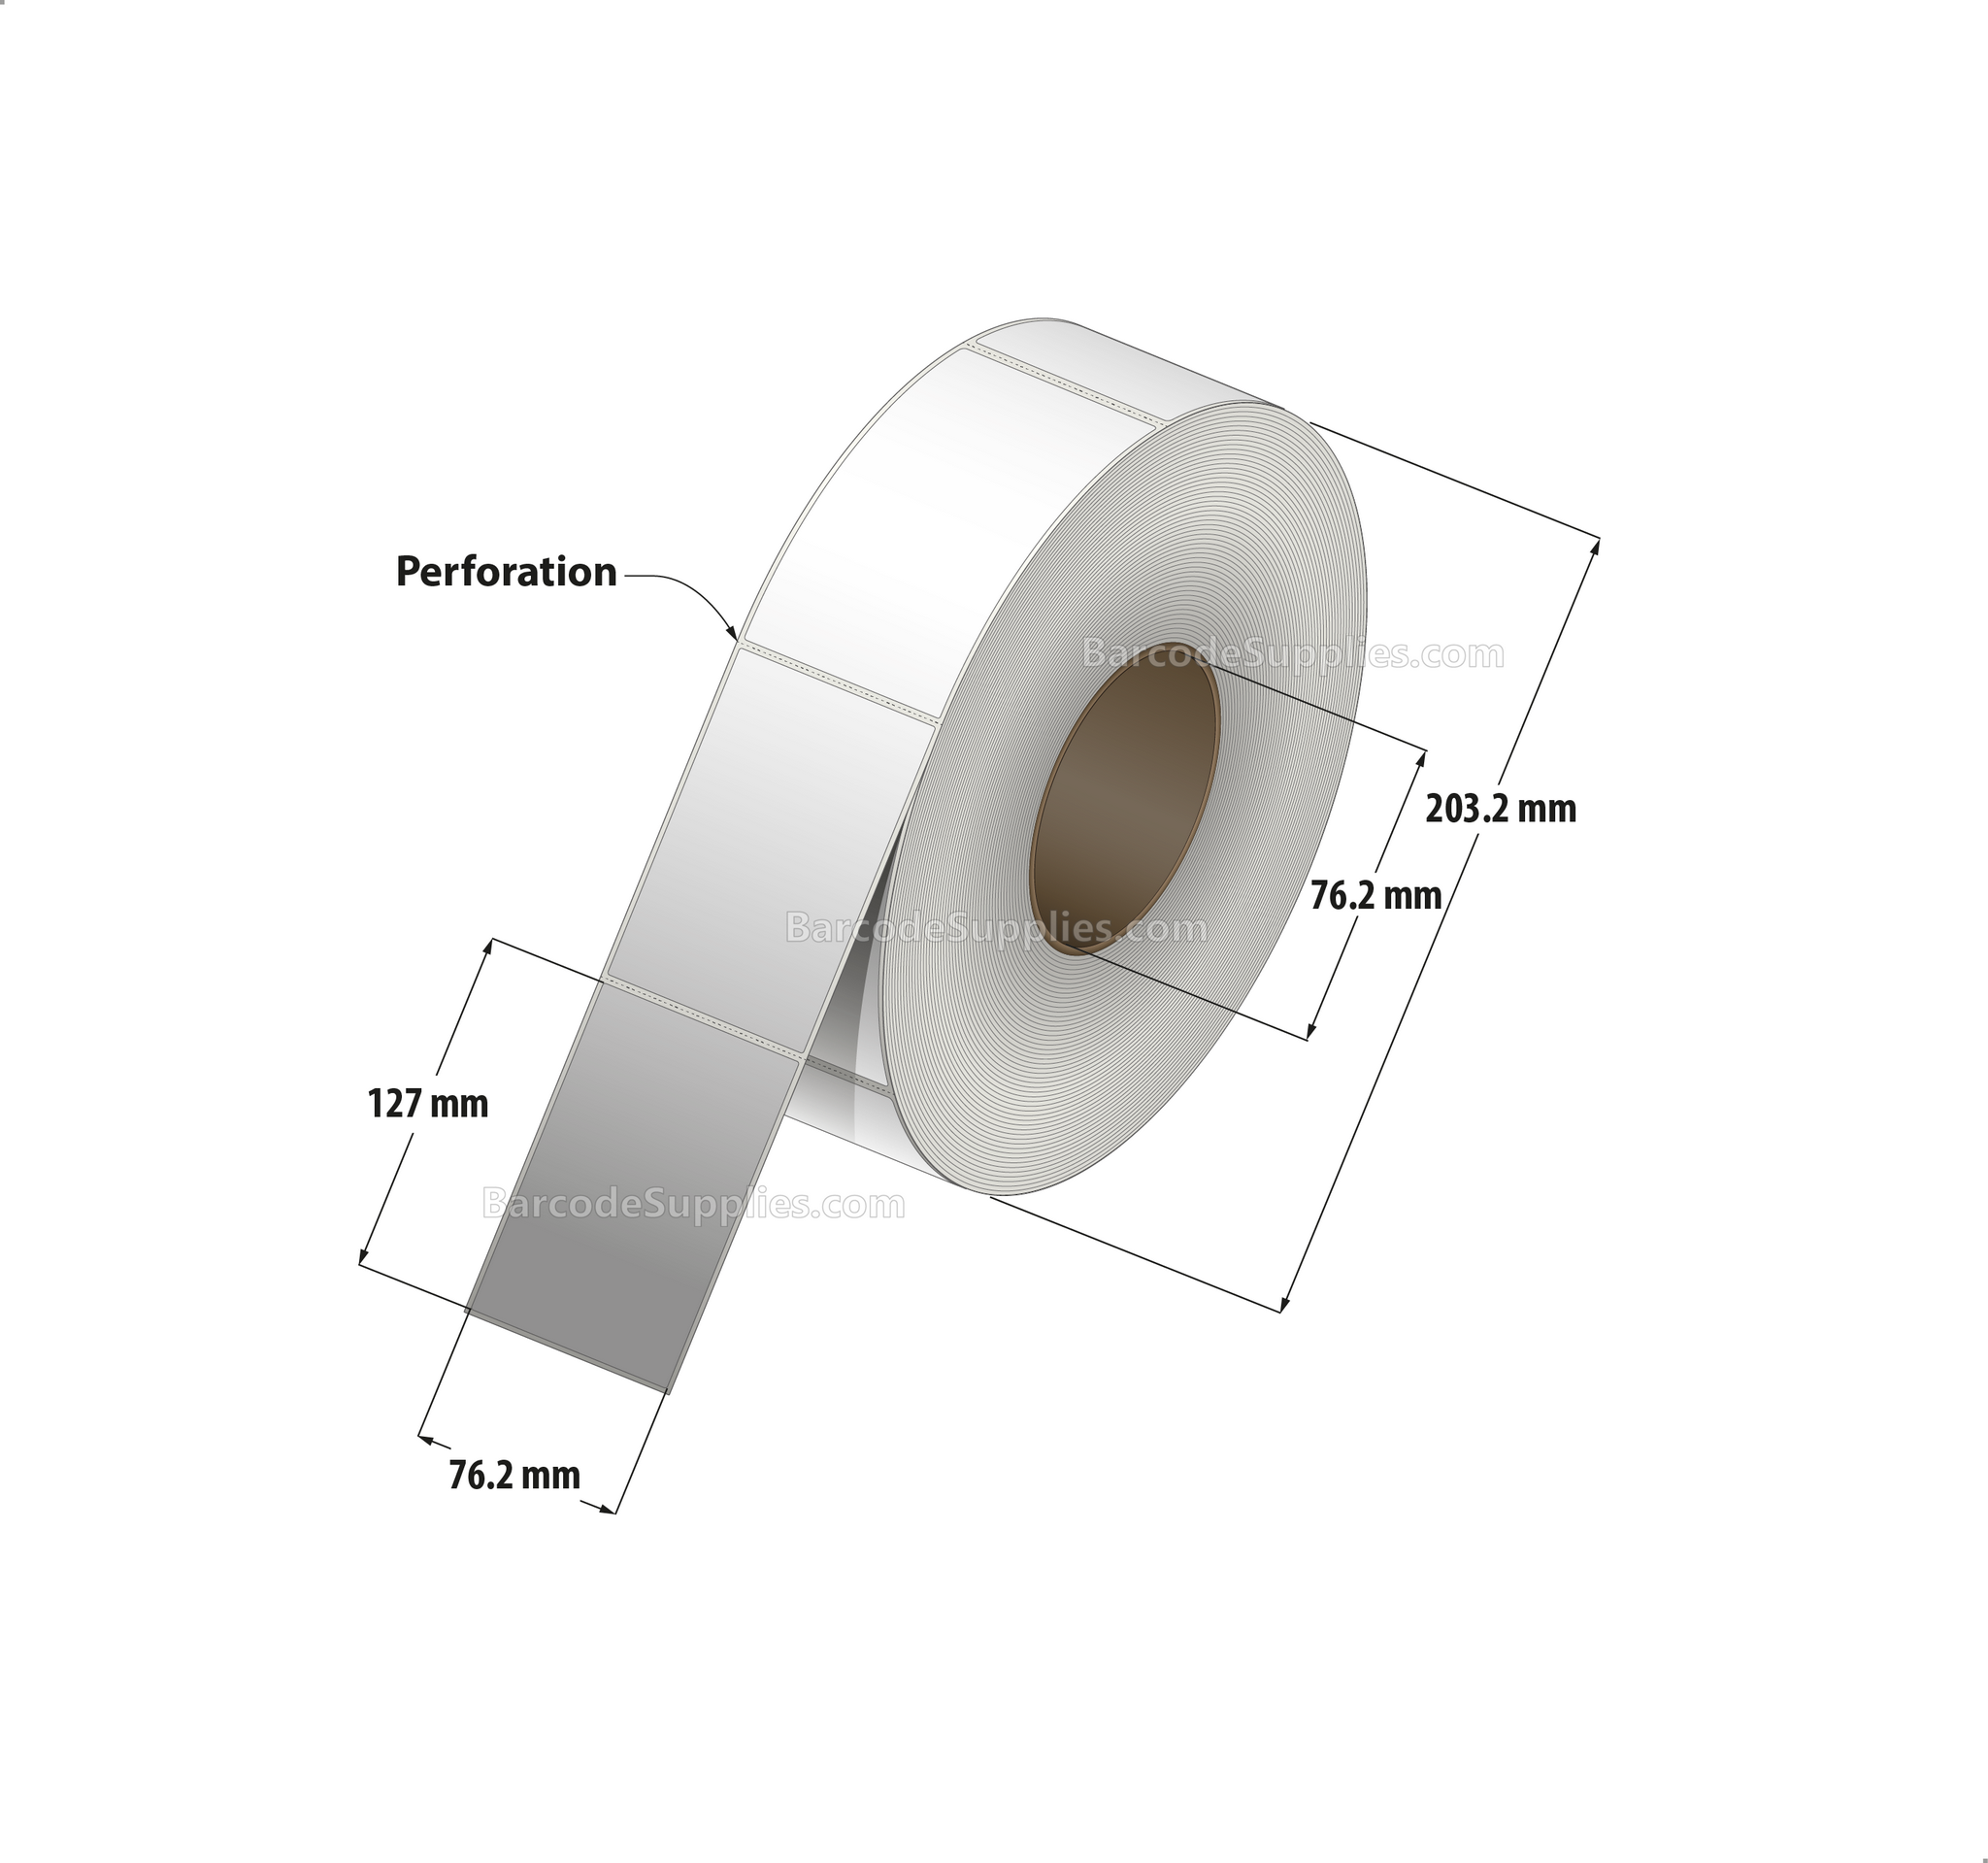 3 x 5 Direct Thermal White Labels With Acrylic Adhesive - Perforated - 1200 Labels Per Roll - Carton Of 8 Rolls - 9600 Labels Total - MPN: RD-3-5-1200-3 - BarcodeSource, Inc.